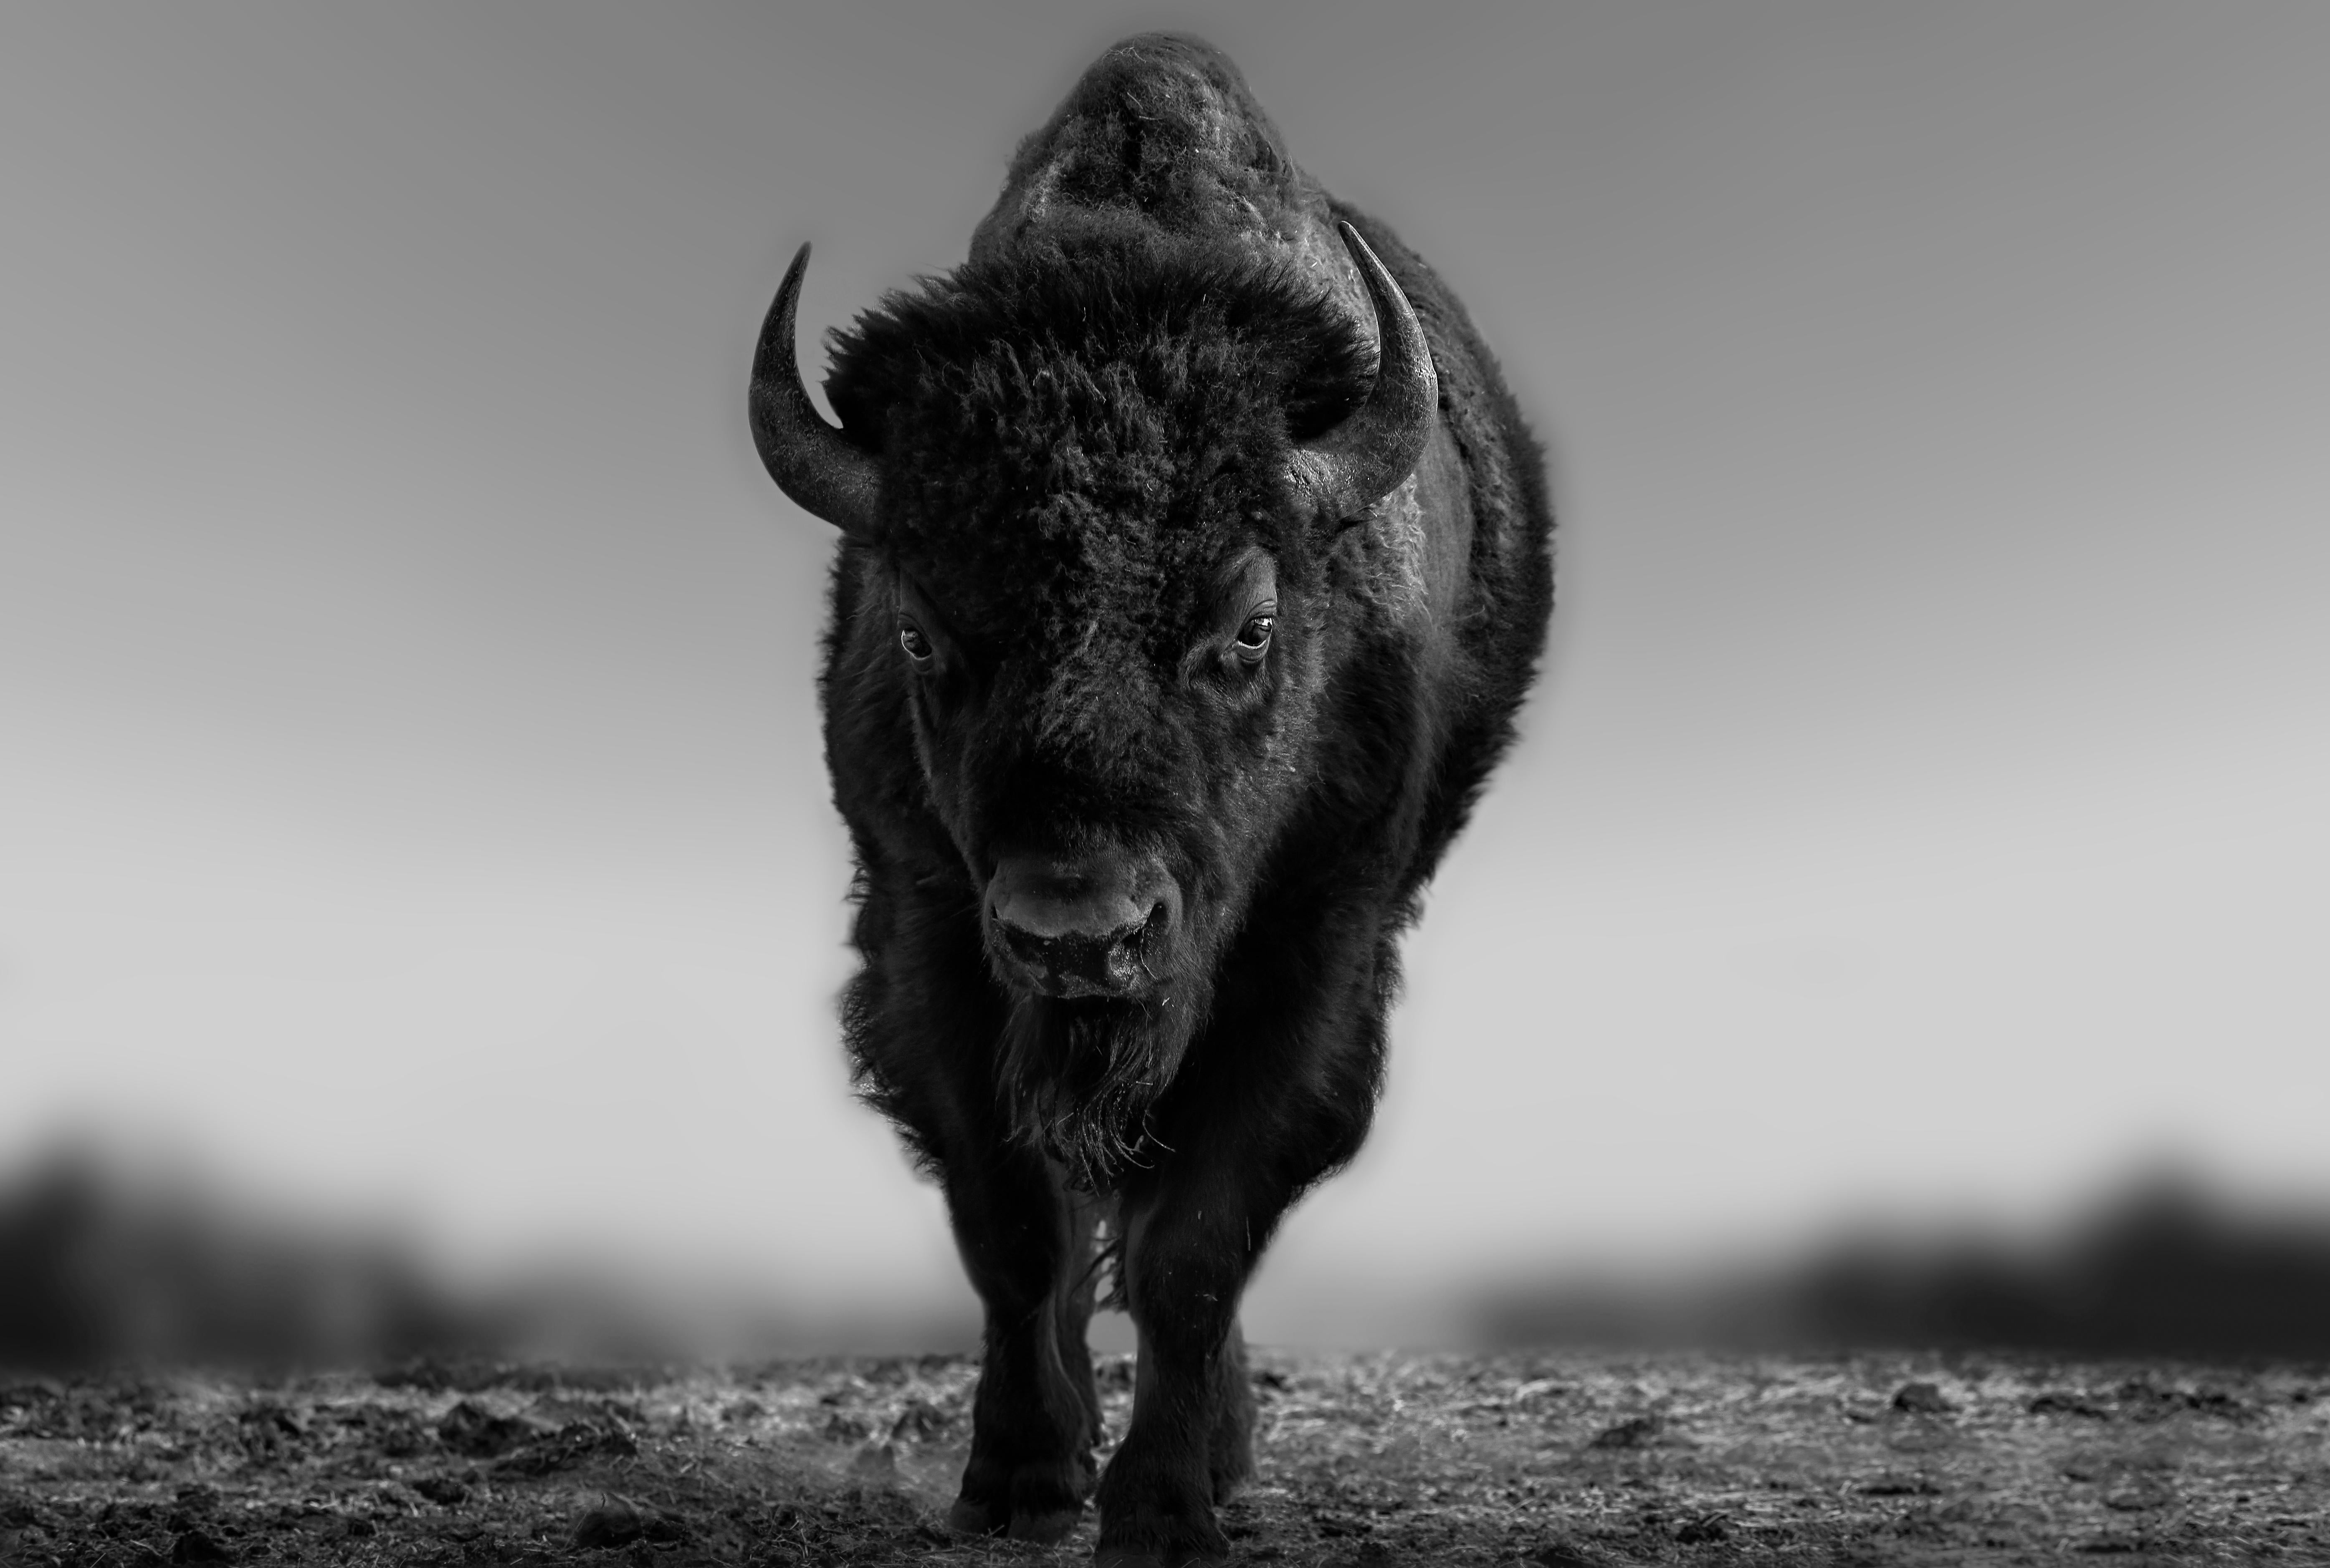 Shane Russeck Animal Print - The Beast 20x30 - Black and White Photography of Bison, Buffalo Western Art